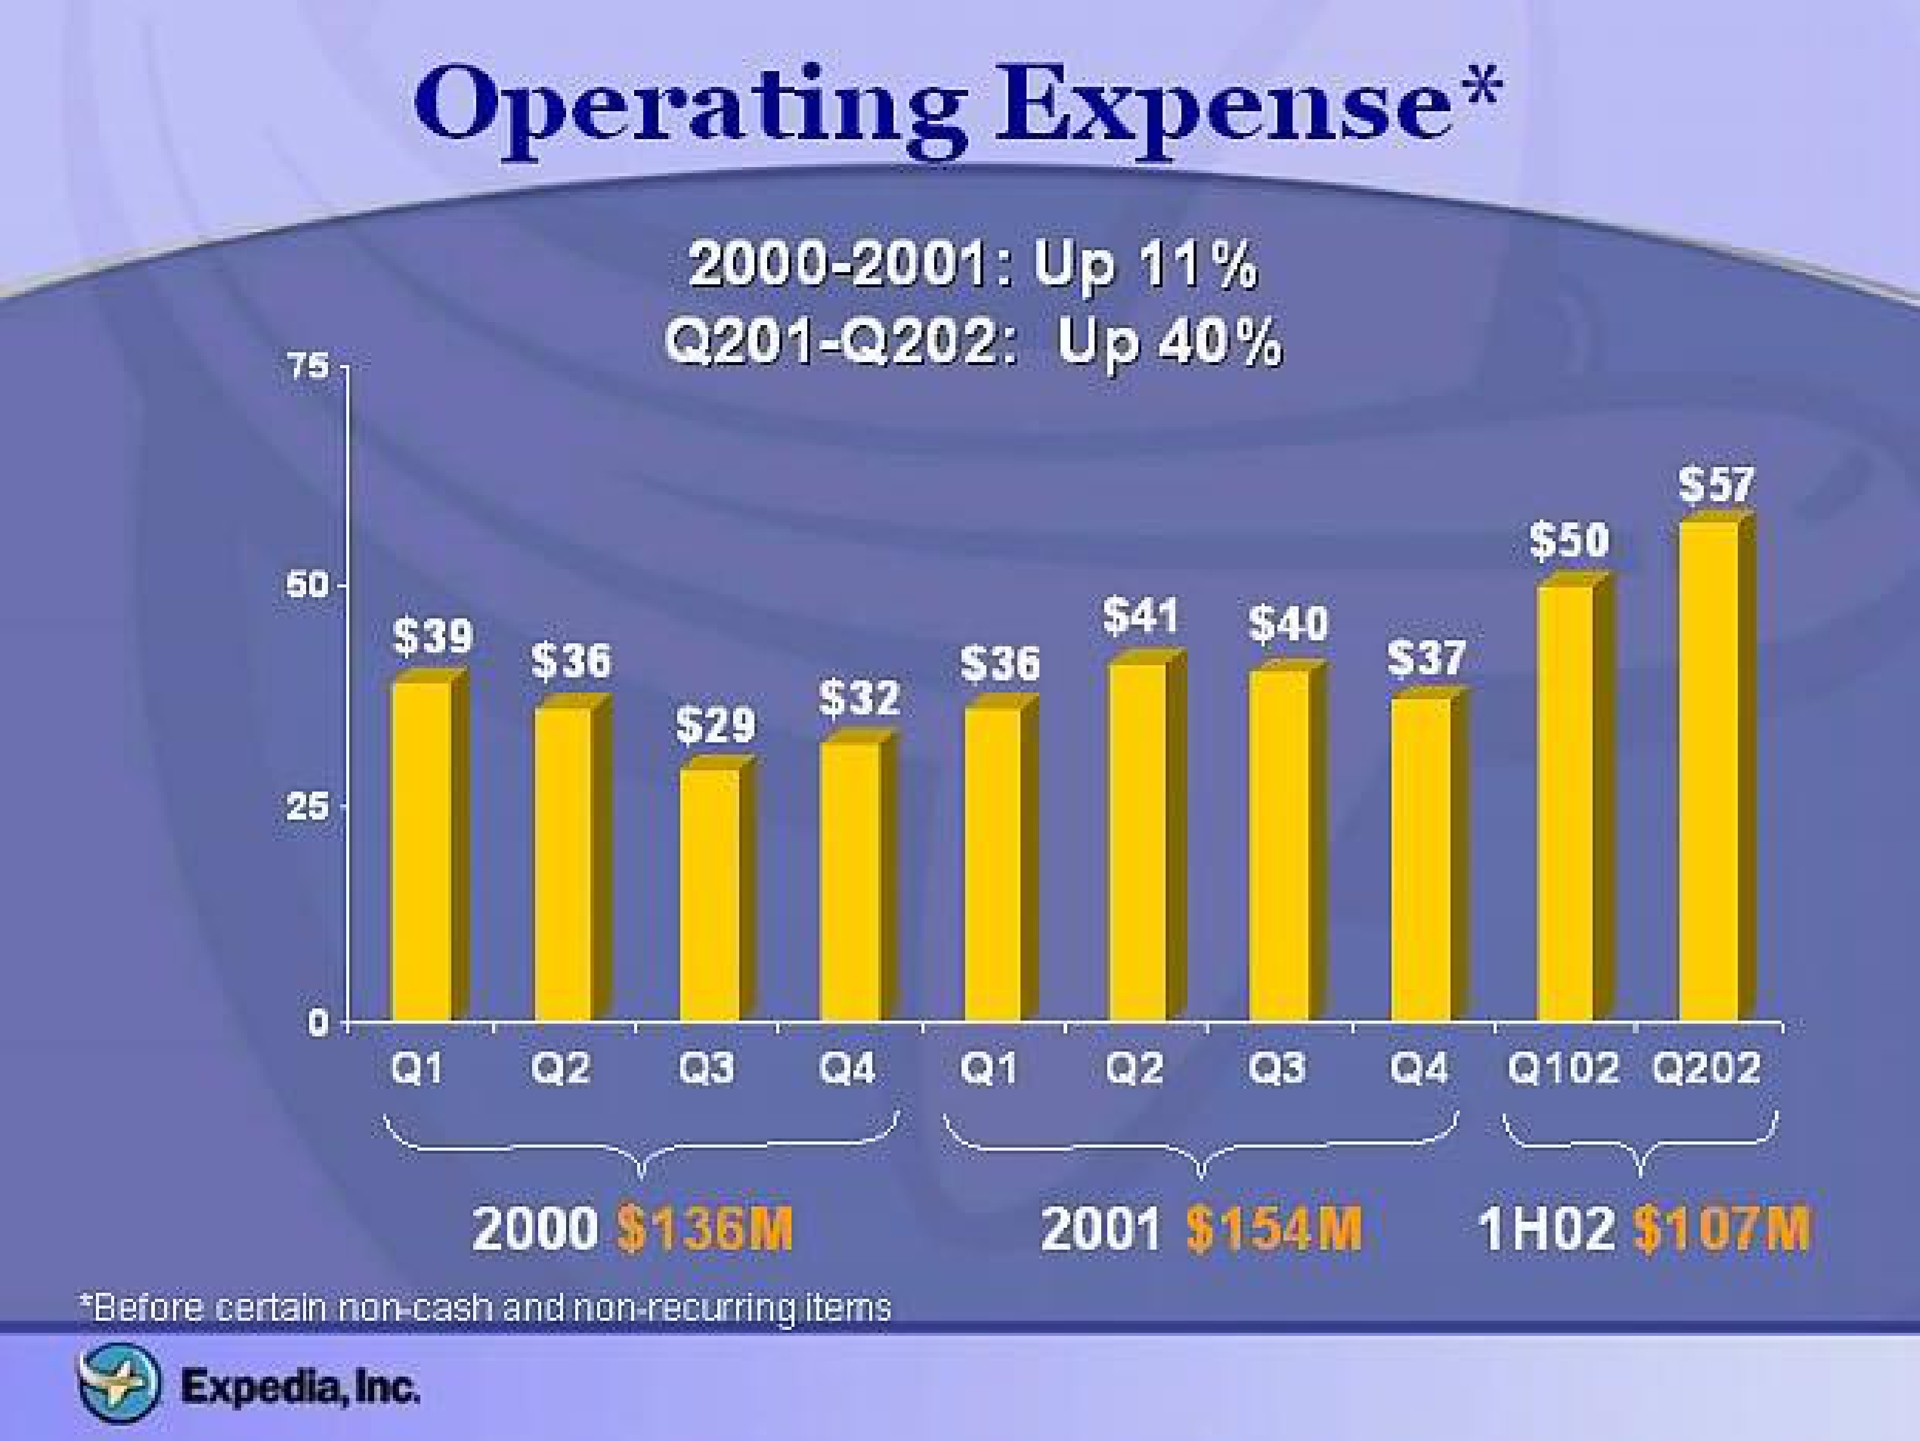 operating expense up up i a ase aes a | Expedia